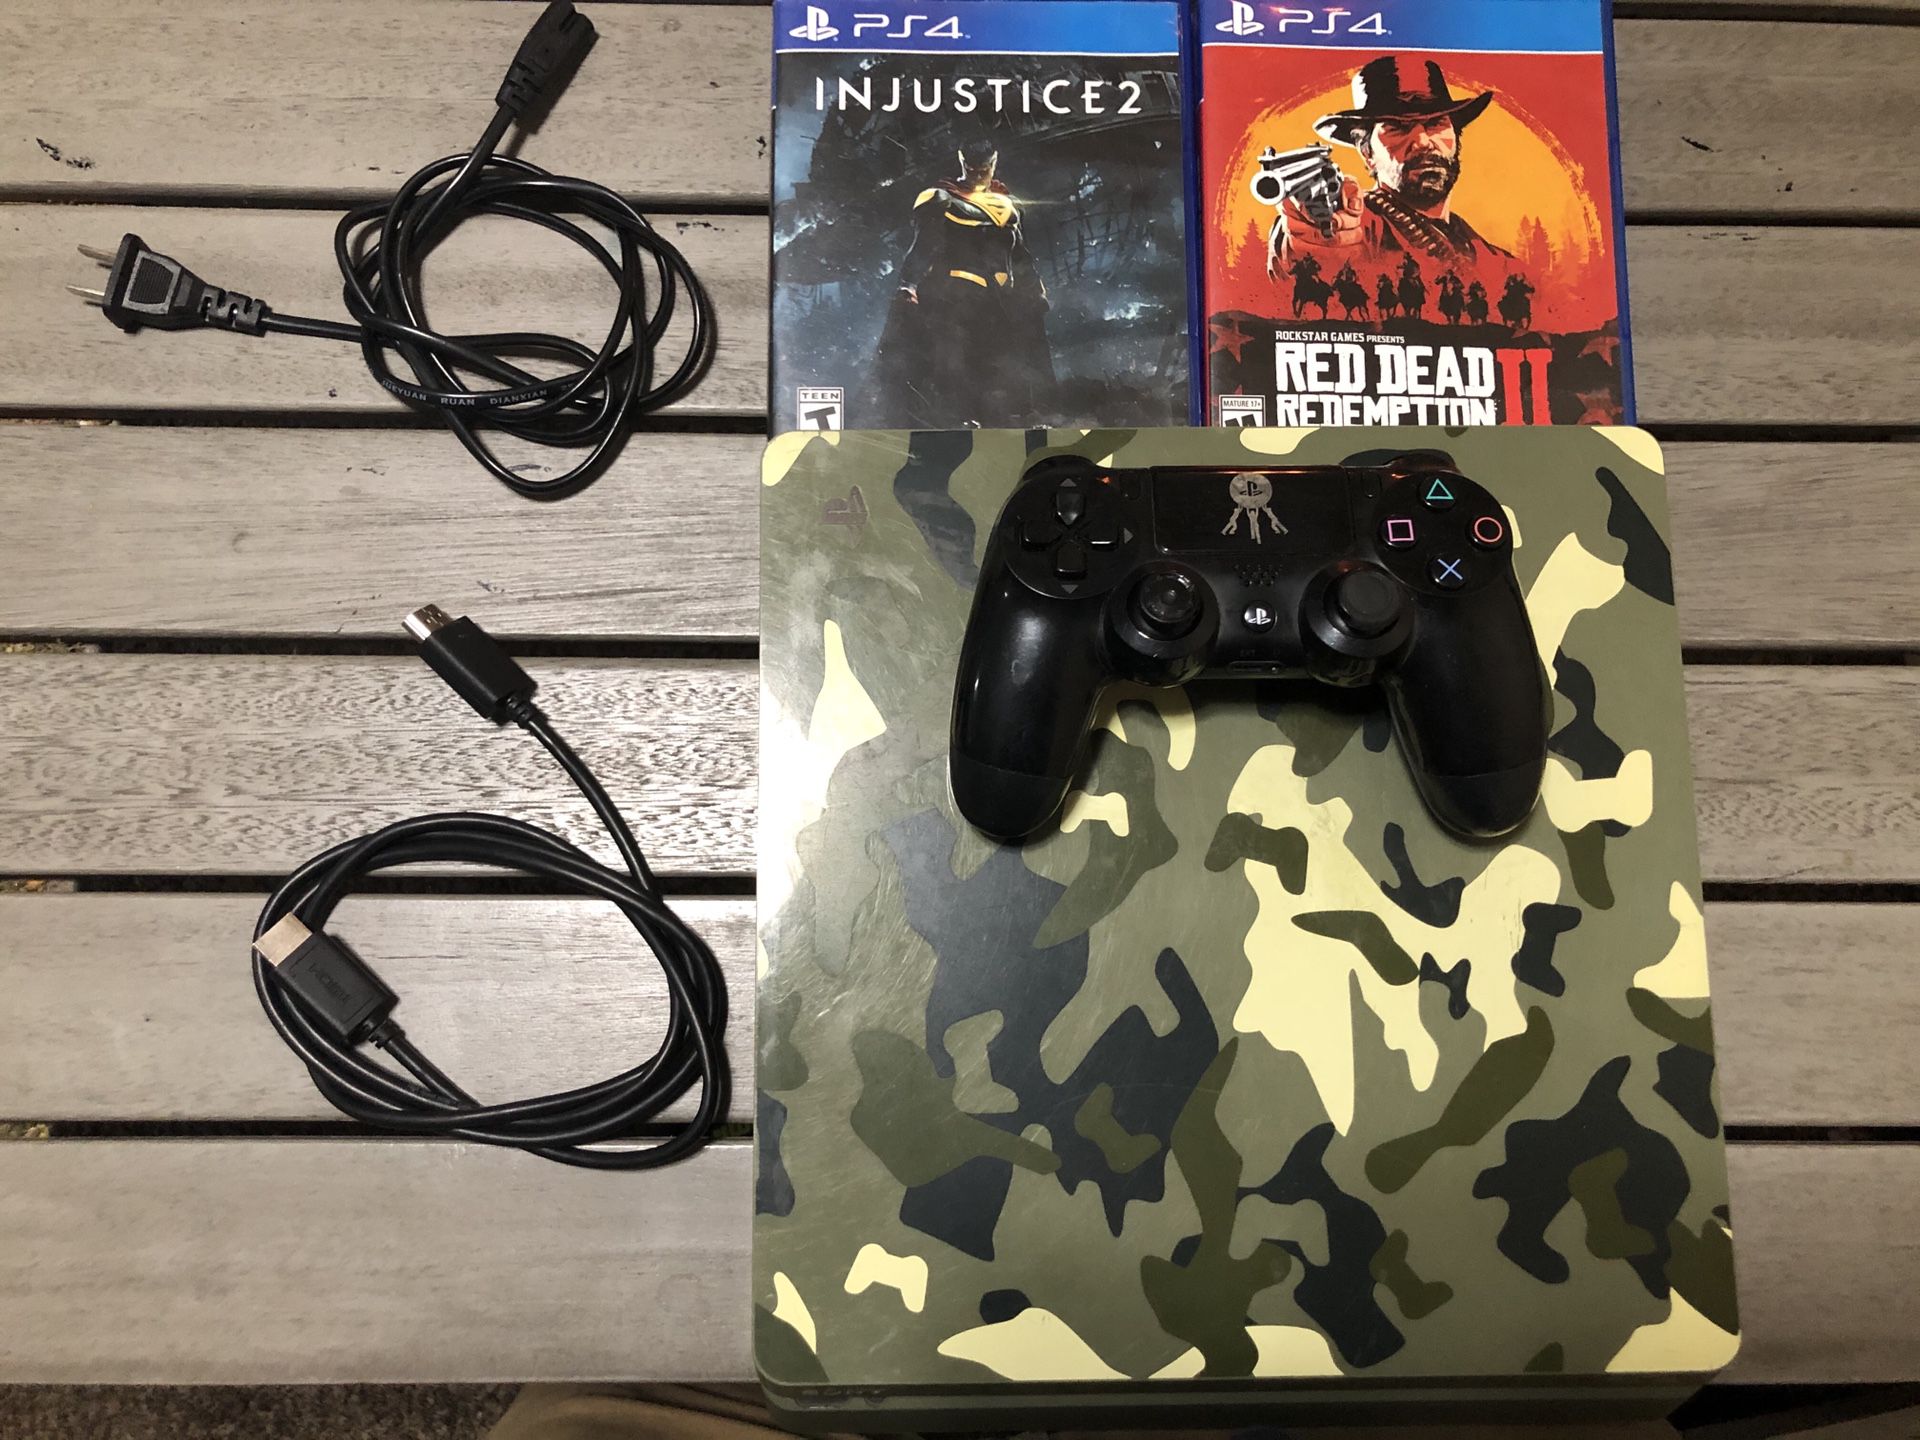 PS4 Slim 1TB Special Edition! Comes with one controller + Red Dead Redemption + Injustice 2 + all cables.